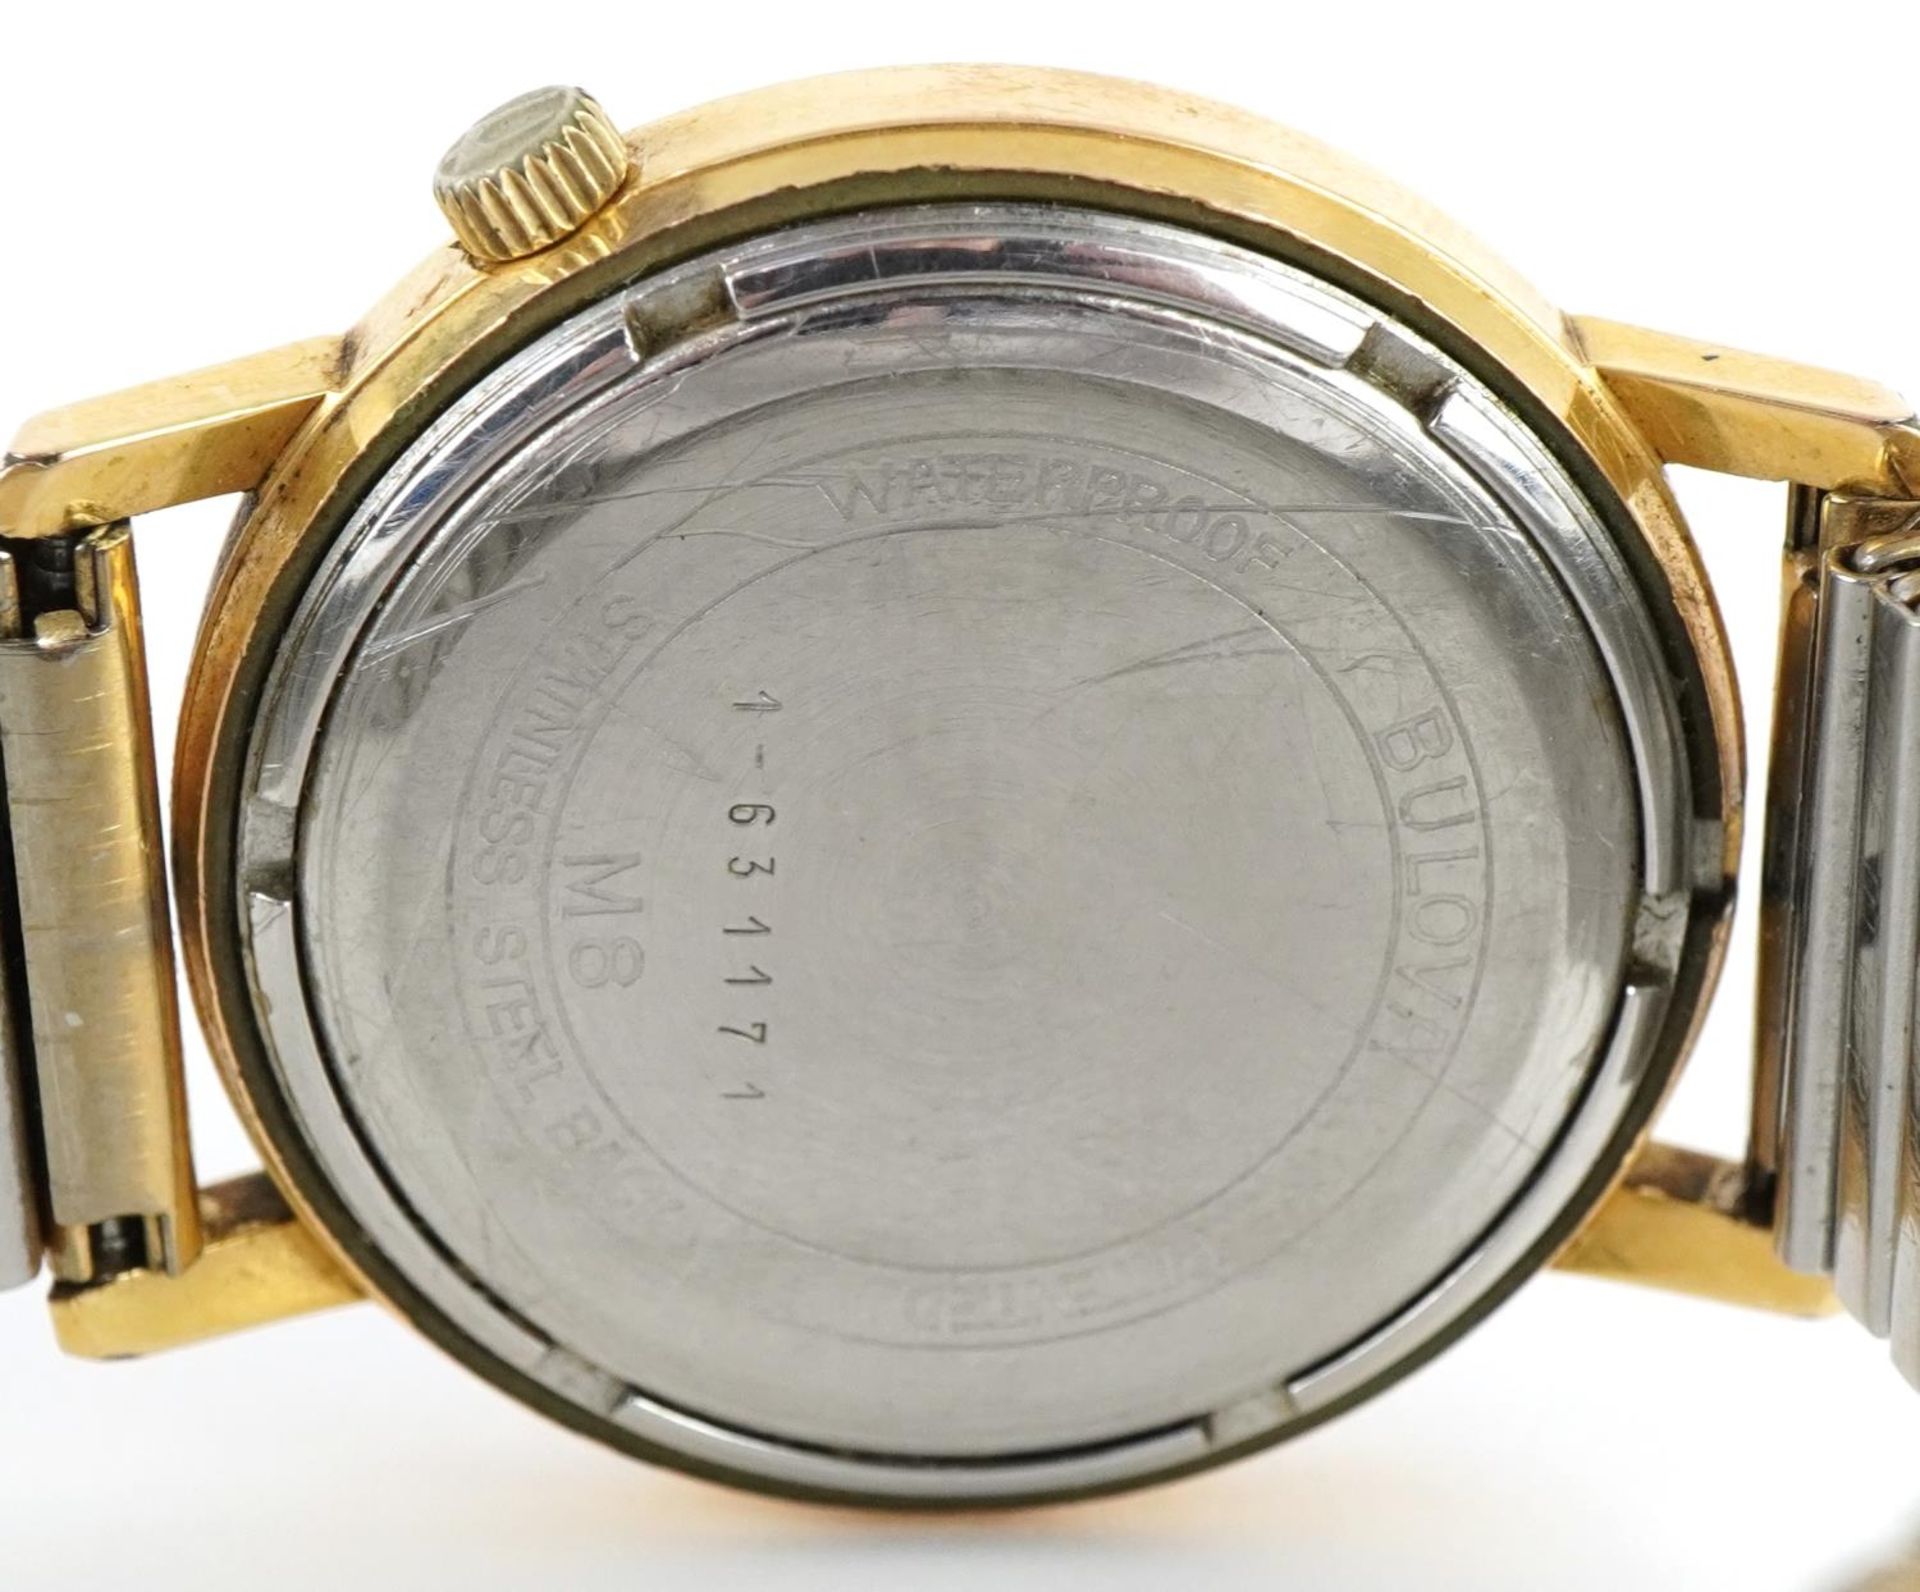 Bulova, gentlemen's Bulova Accutron wristwatch with date aperture, the case numbered 1-631171, - Image 4 of 5